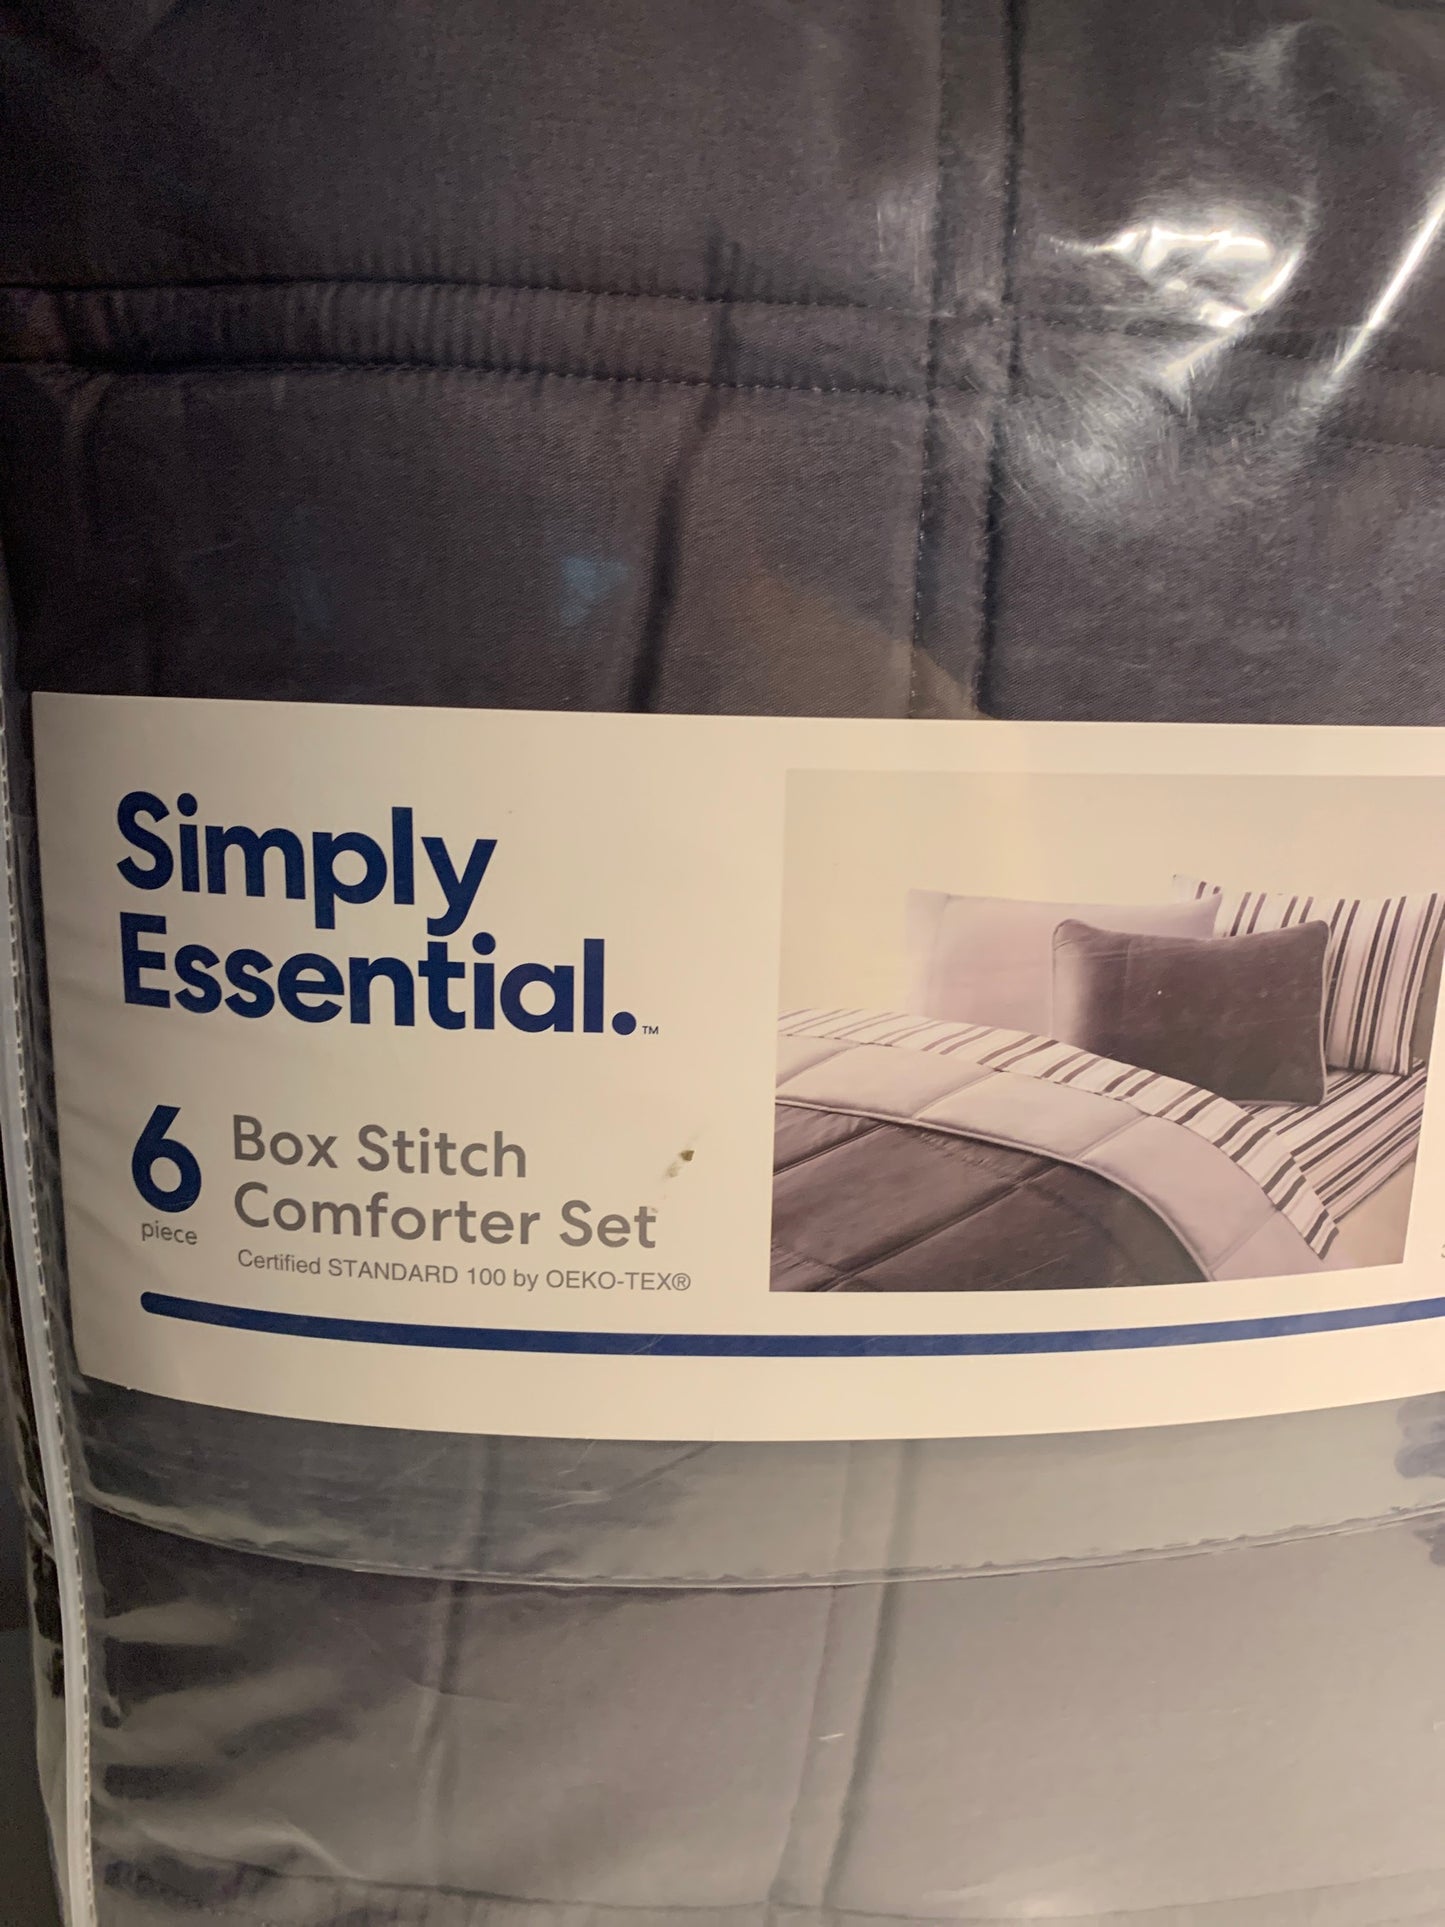 Simply Essential Boxstitch 6-Piece Twin/twin XL Comforter Set in Excalibur